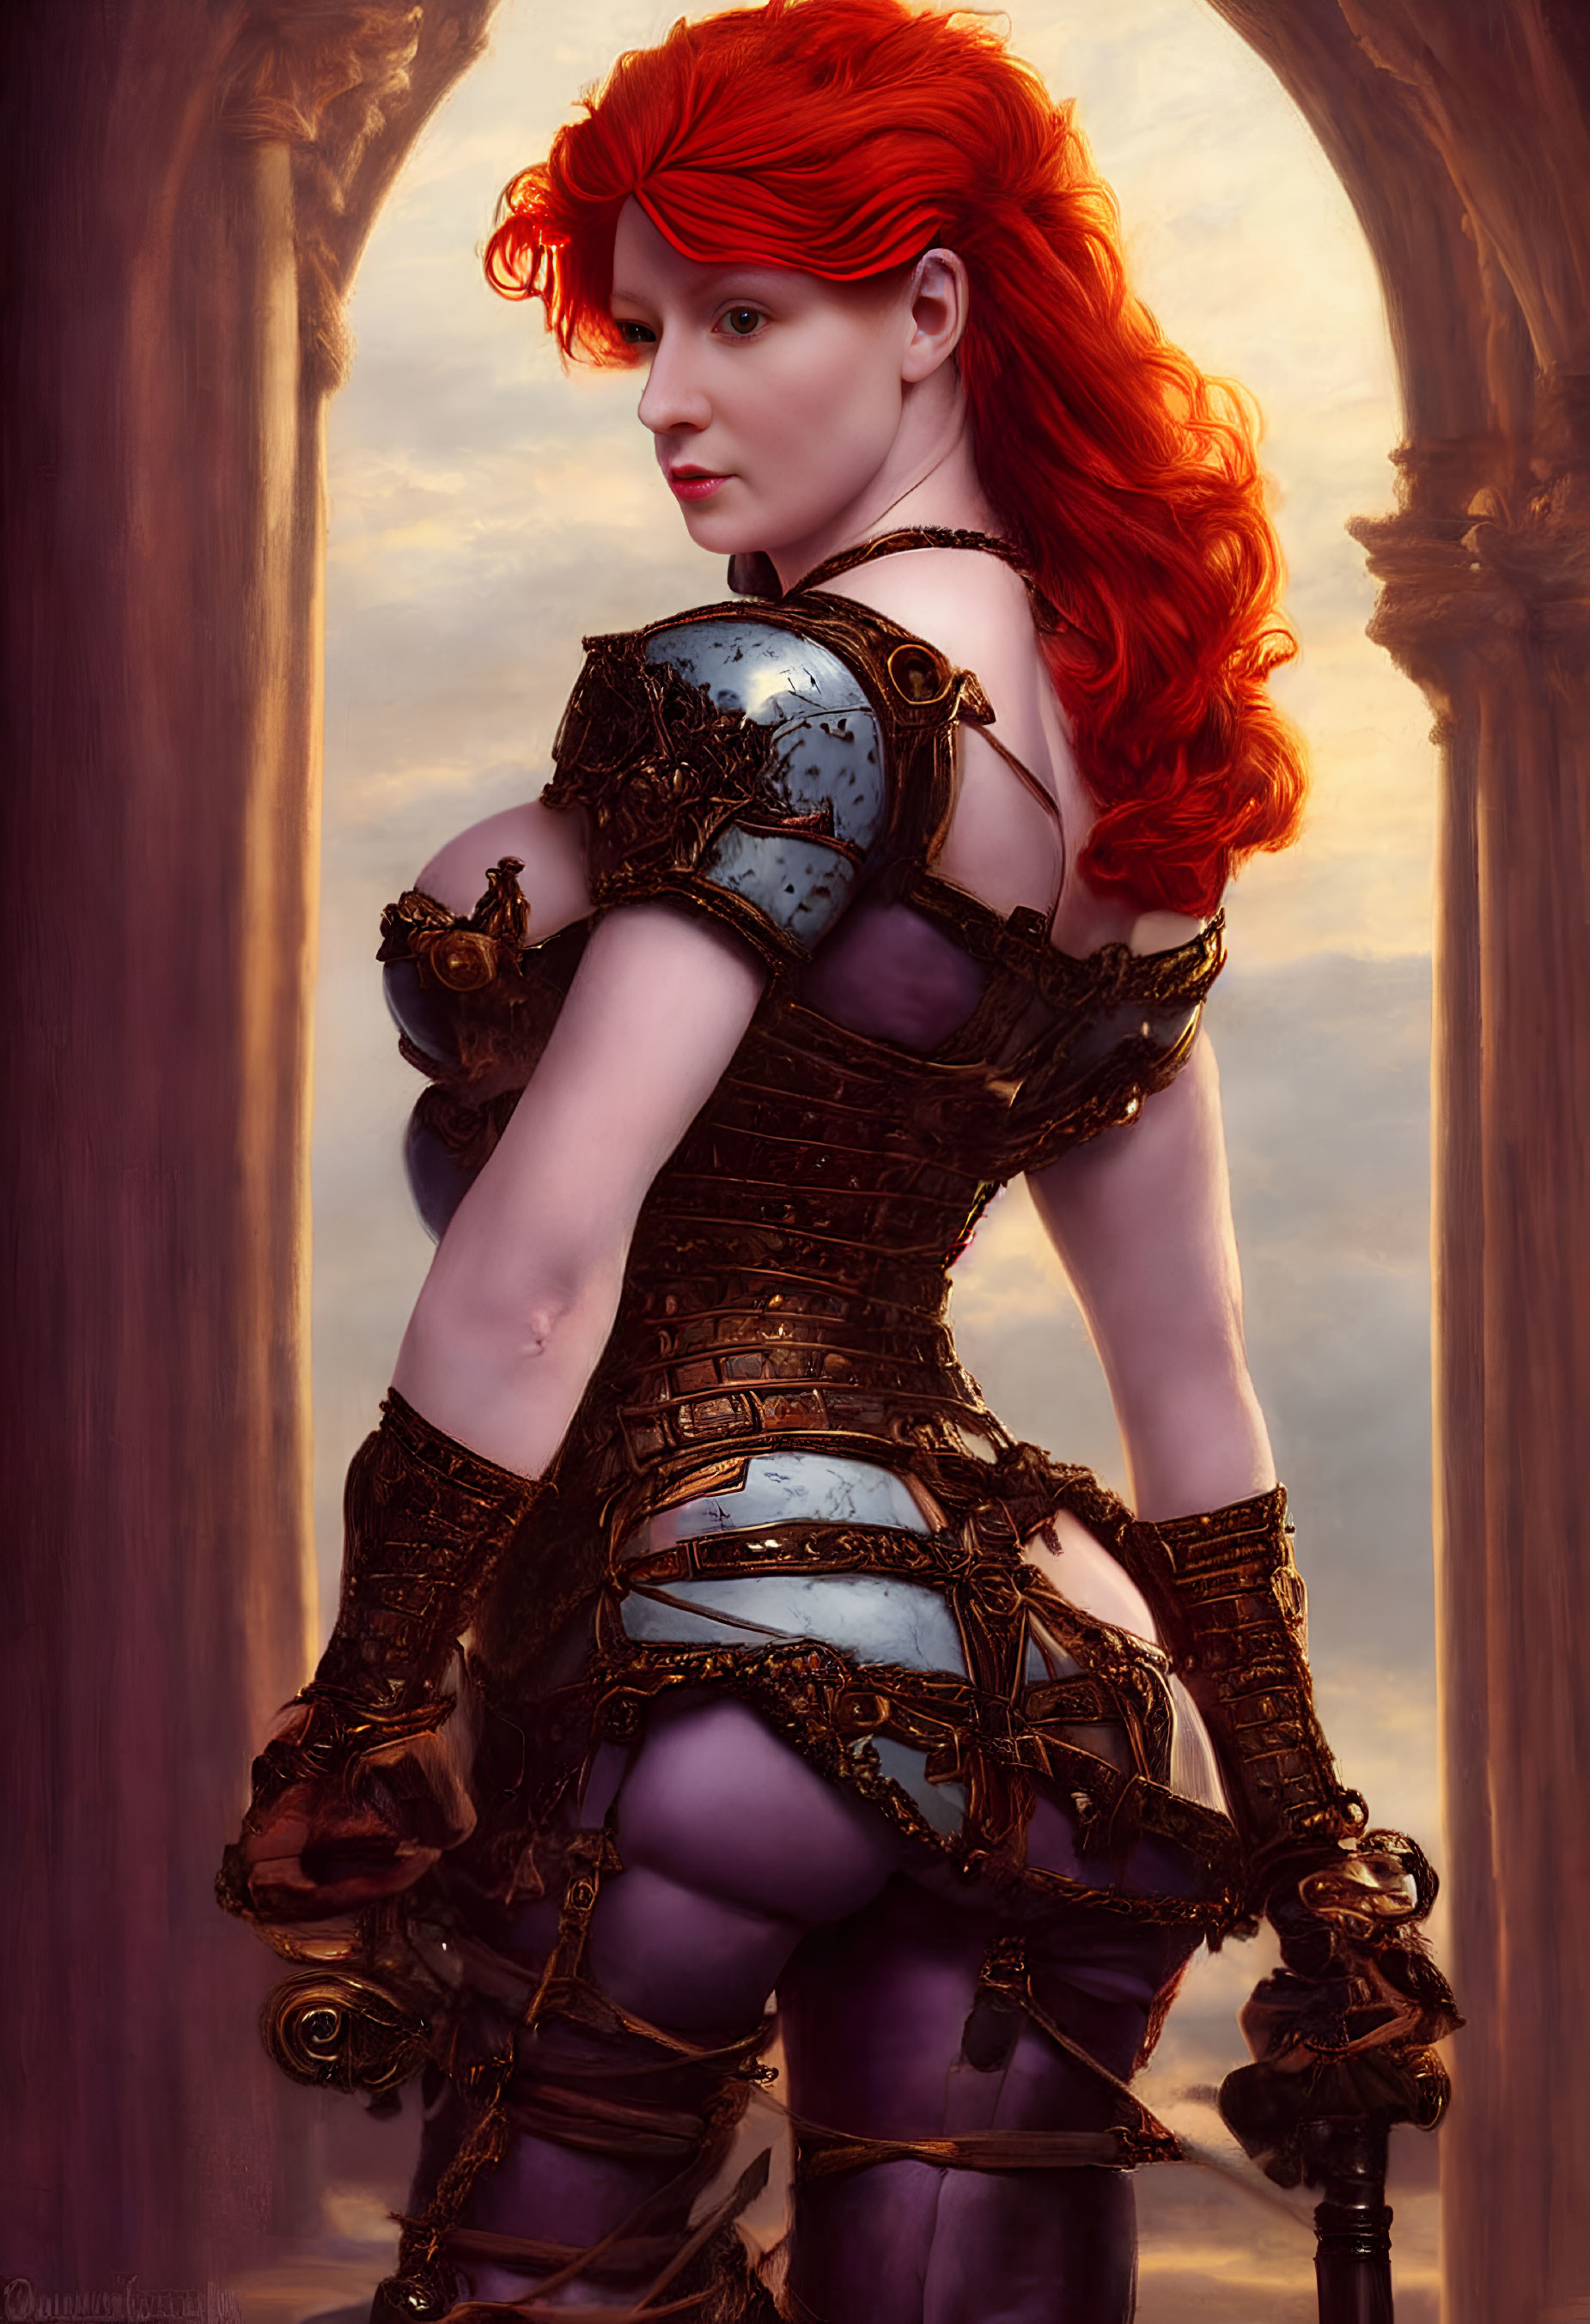 Female warrior digital artwork with fiery red hair, gold and silver armor, holding a sword in dusky